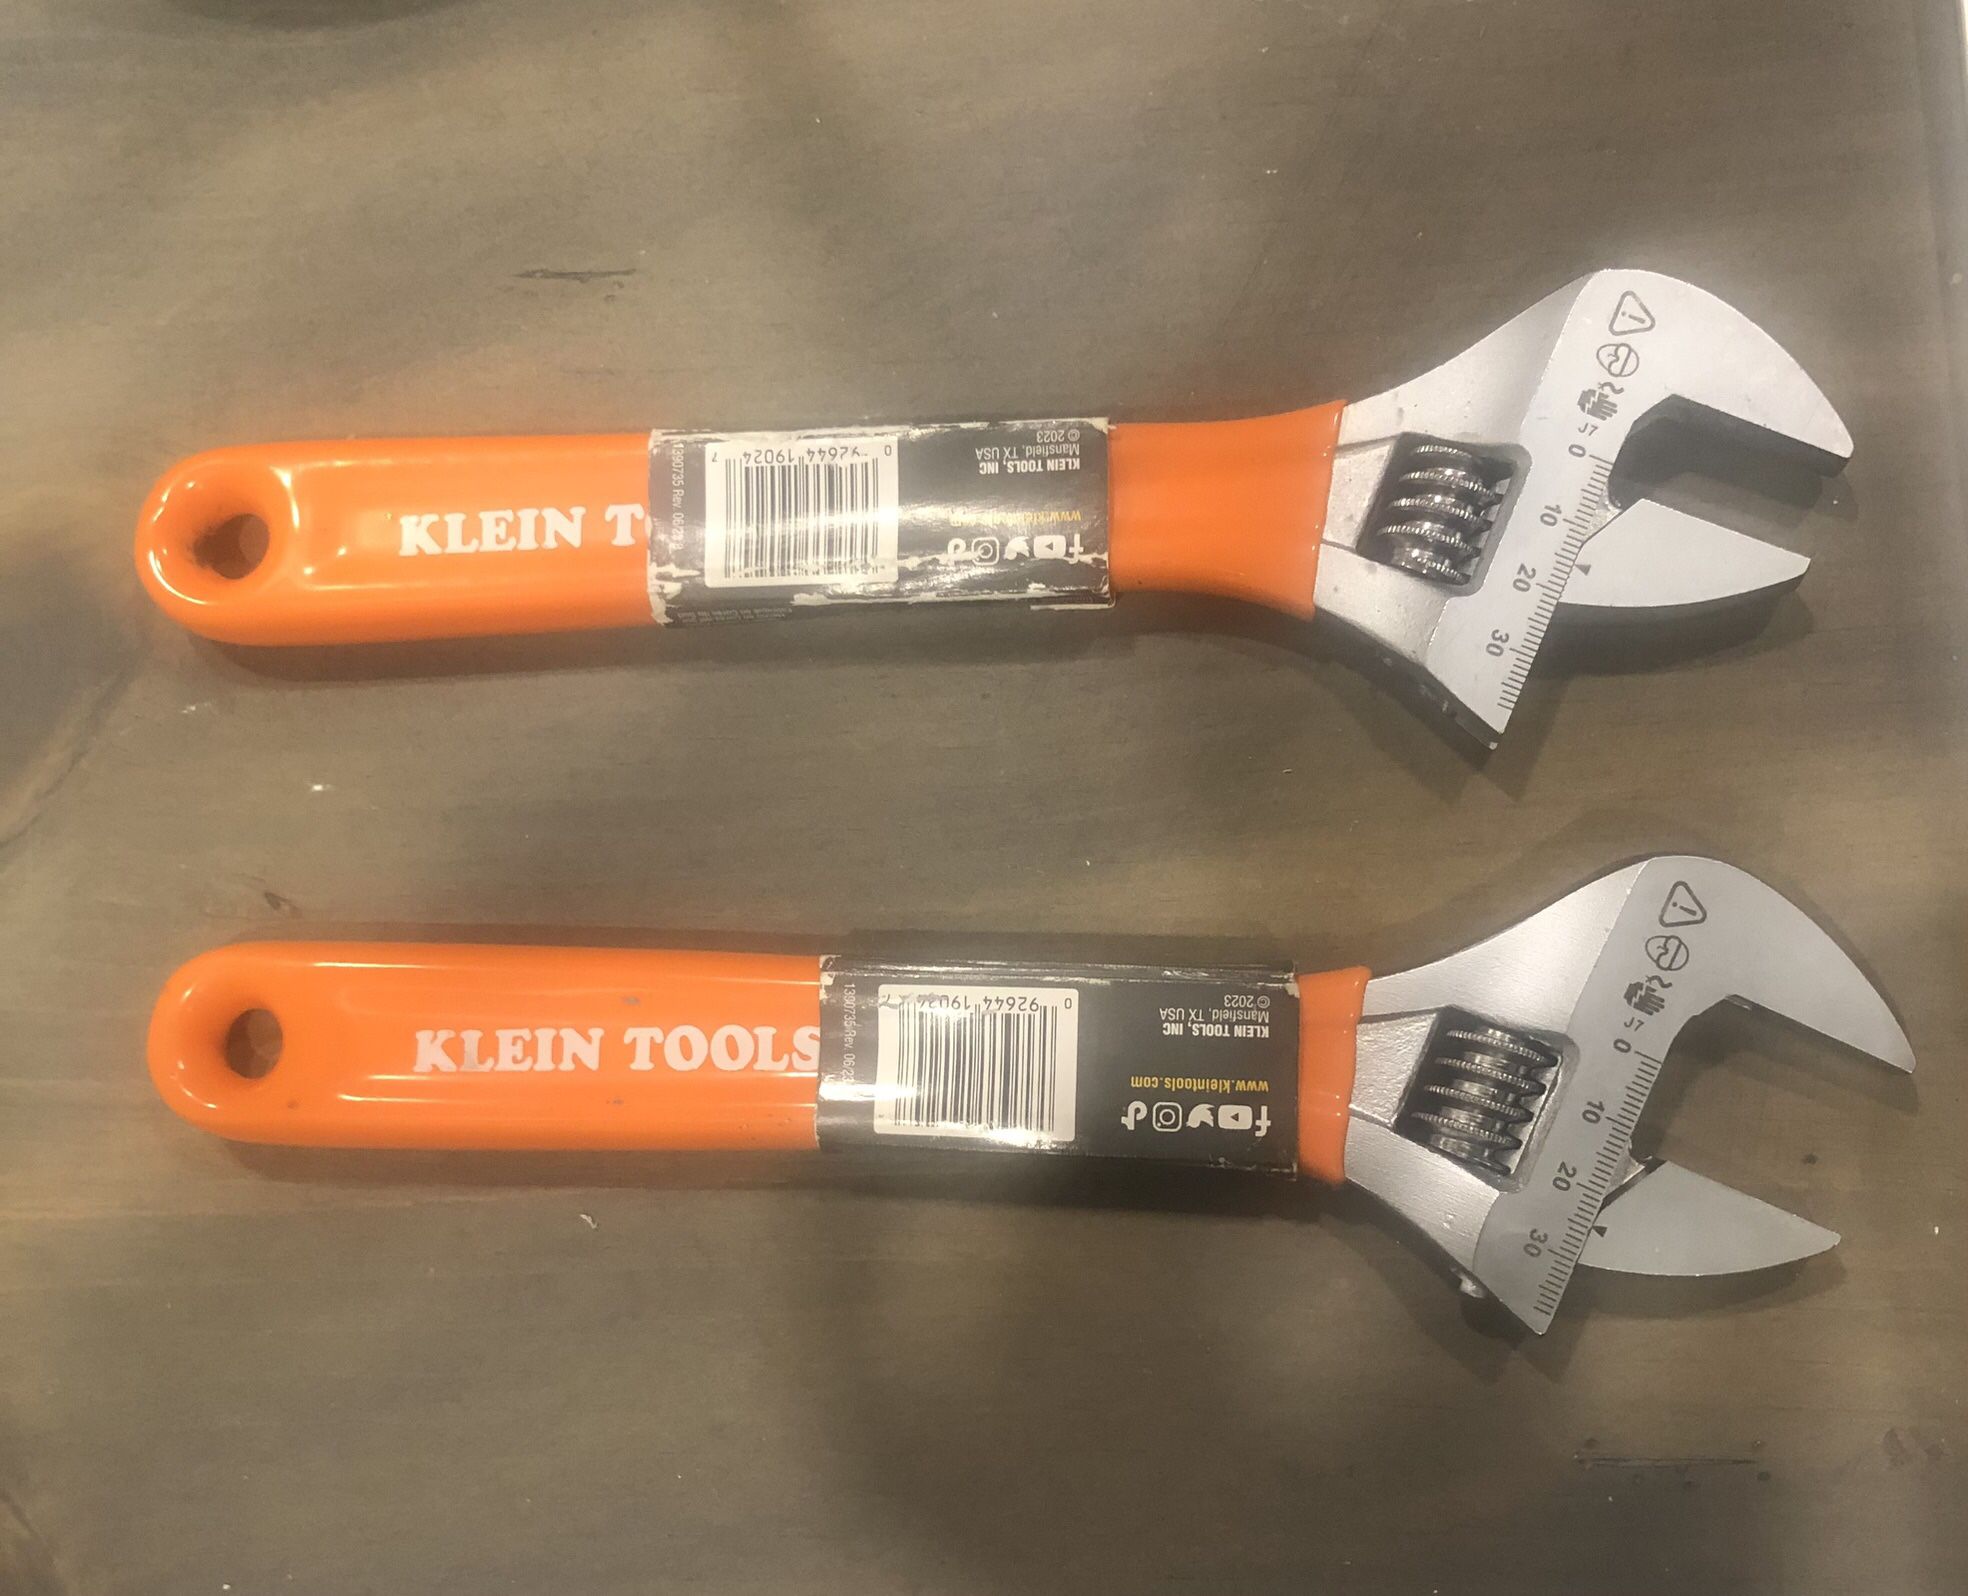 NEW - 2 Wrenches Adjustable 10-inch  (used 1x) & Toilet Wax Ring (unopened box) - $60 Value 